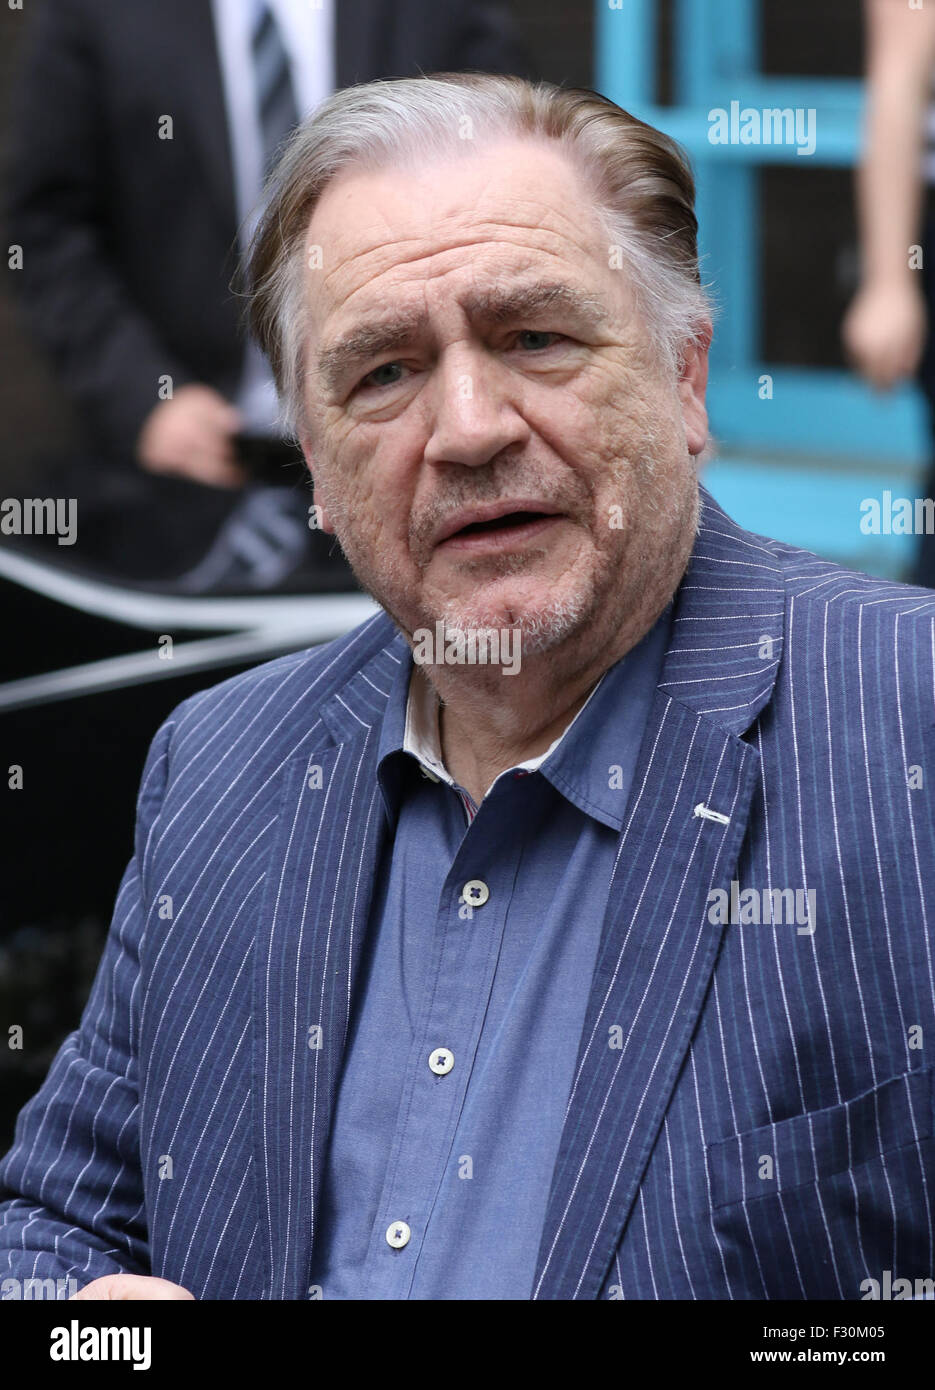 London, UK, 20th May 2015: Brian Cox seen at the ITV studios in London. Stock Photo